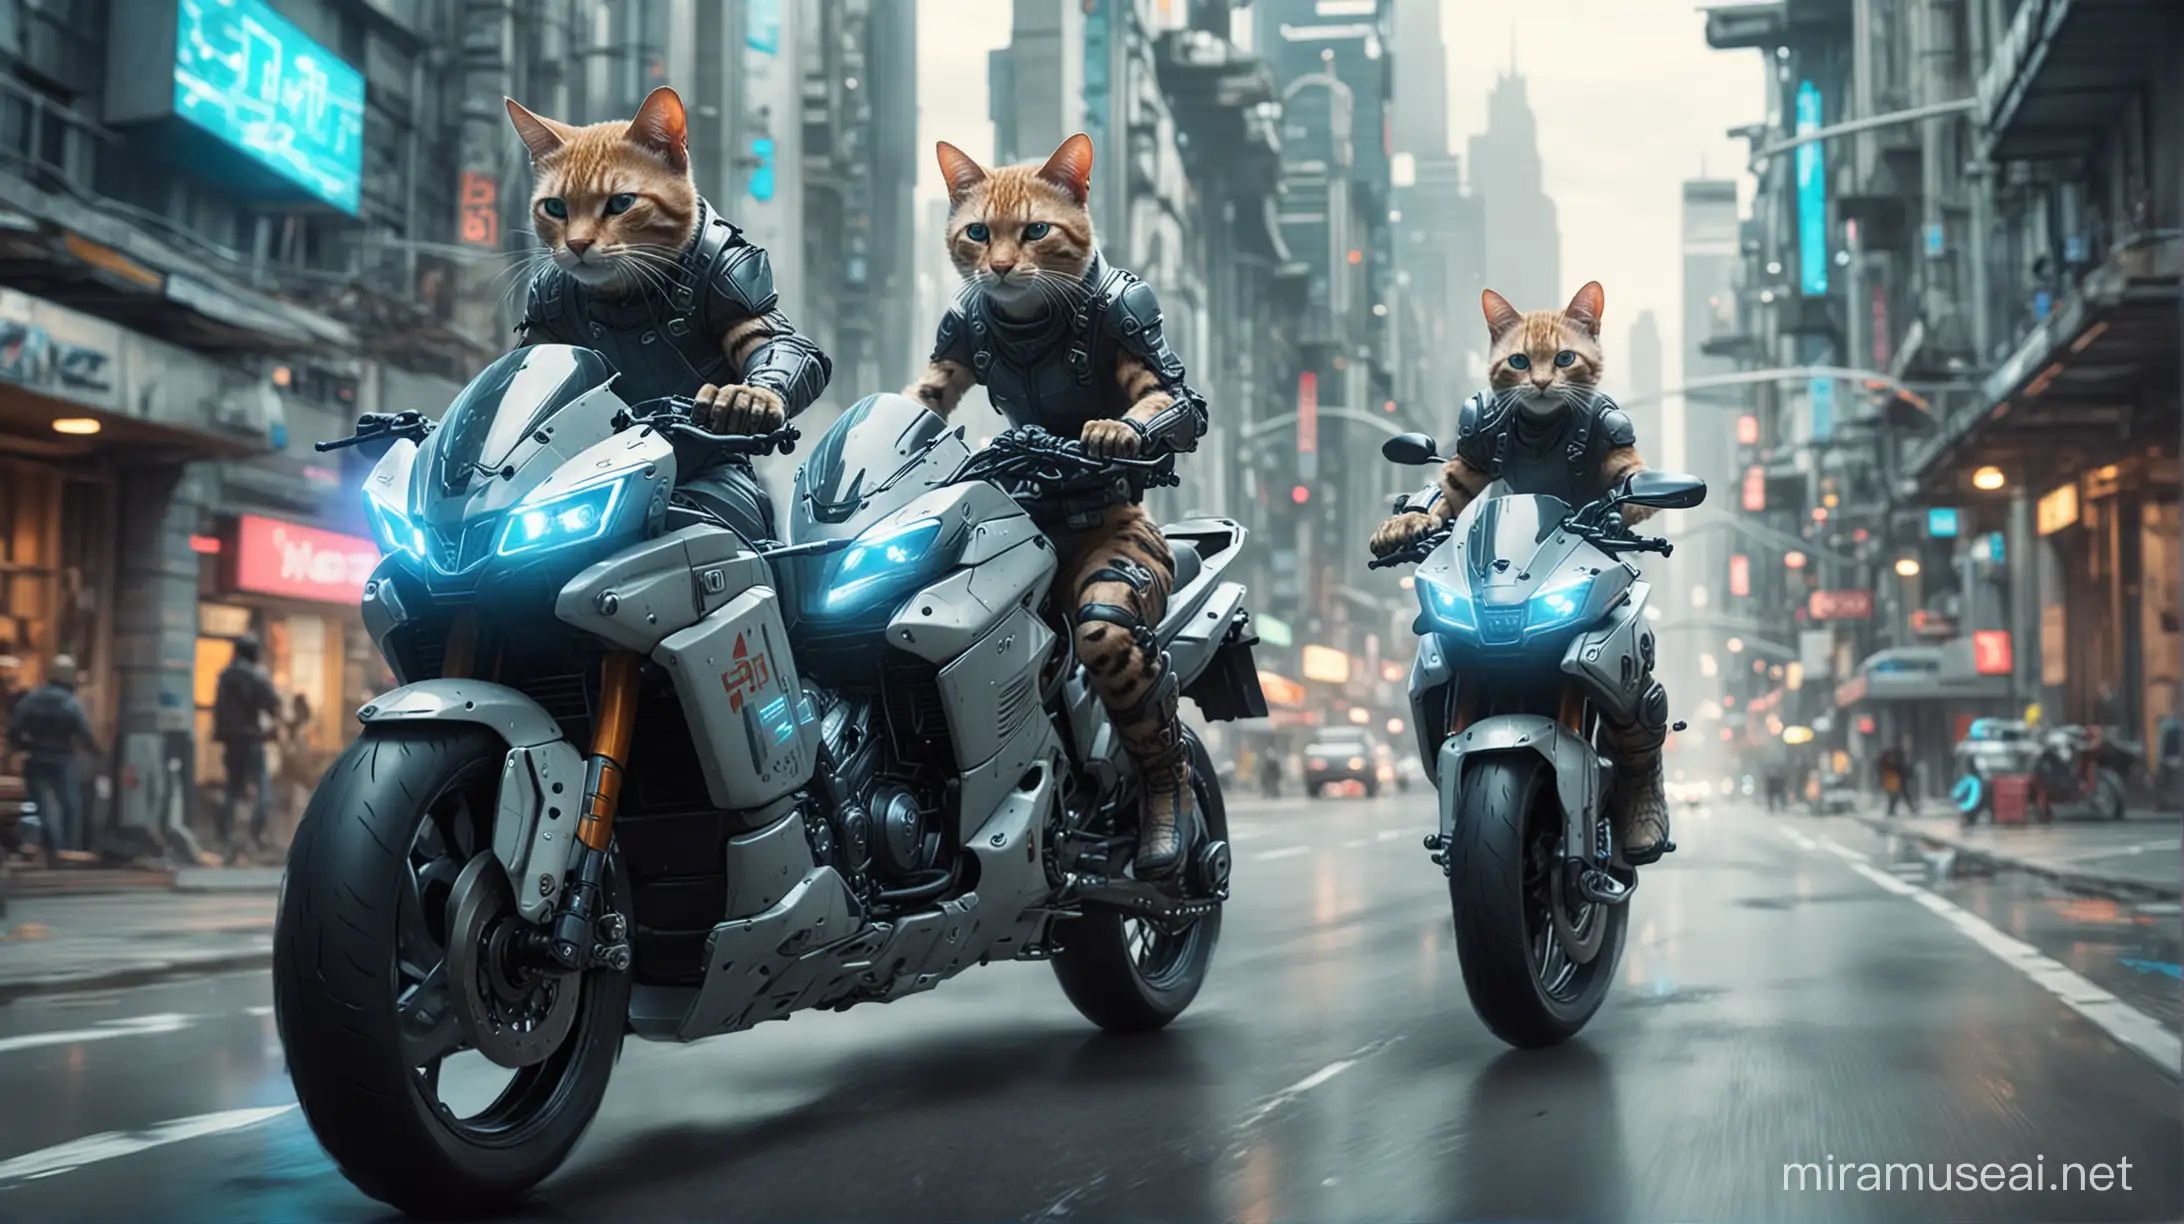 Futuristic Cybercats Dynamic Motorcycle Ride in the City